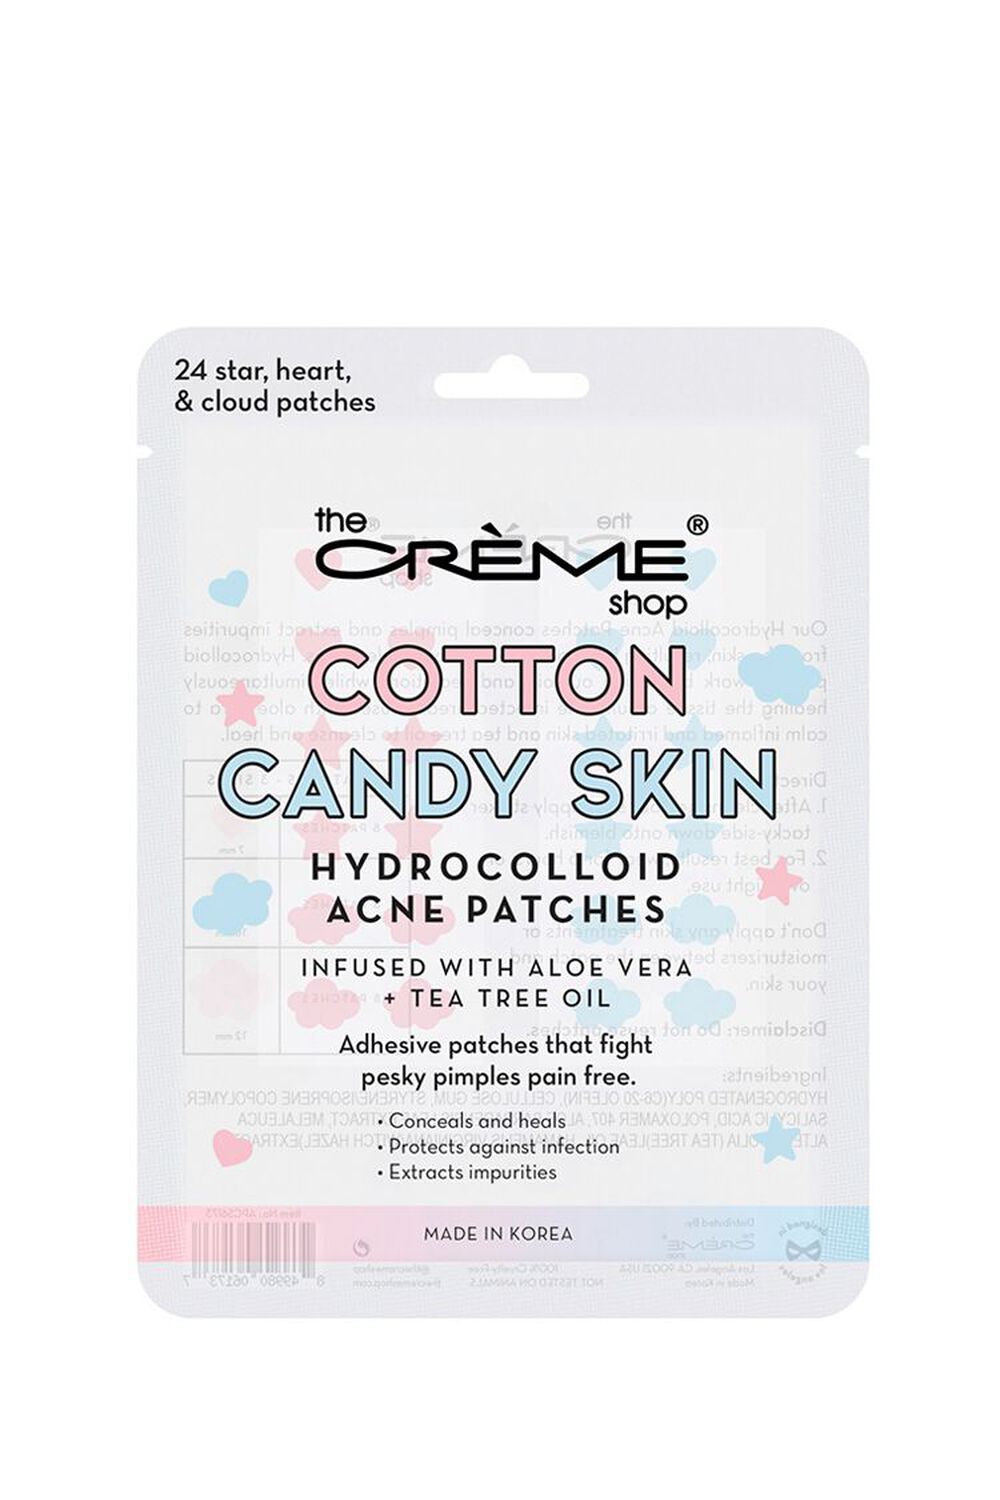 The Creme Shop Cotton Candy Skin Hydrocolloid Dark Spot Acne Patches - Infused with Aloe Vera + Tea Tree , image 1